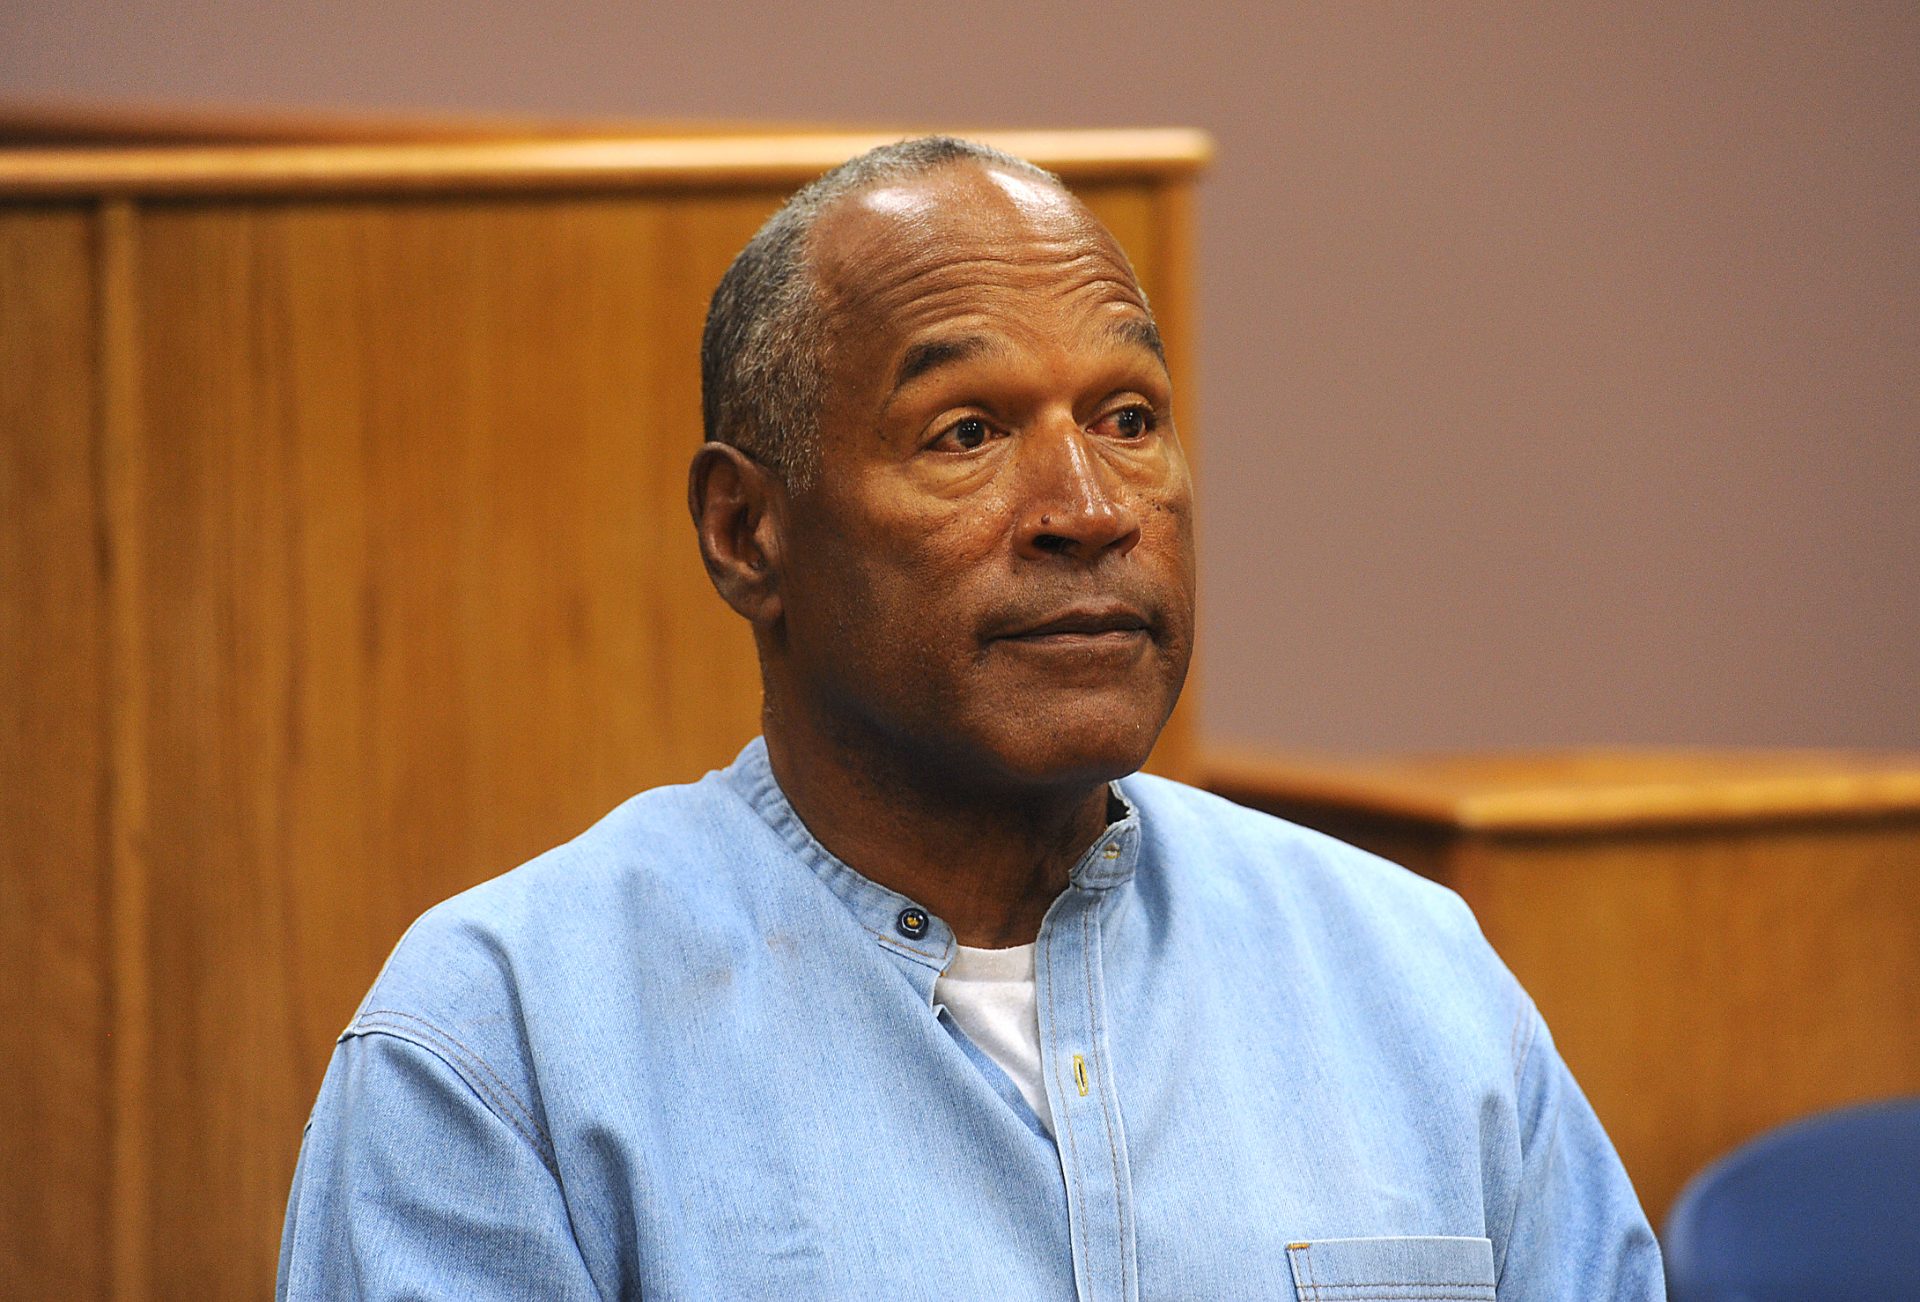 Former professional football player O.J. Simpson listens during a parole hearing at Lovelock Correctional Center in Lovelock, Nevada, U.S., on Thursday, July 20, 2017. Simpson has been granted parole nine years into a 33-year sentence and could be released as soon as Oct. 1.